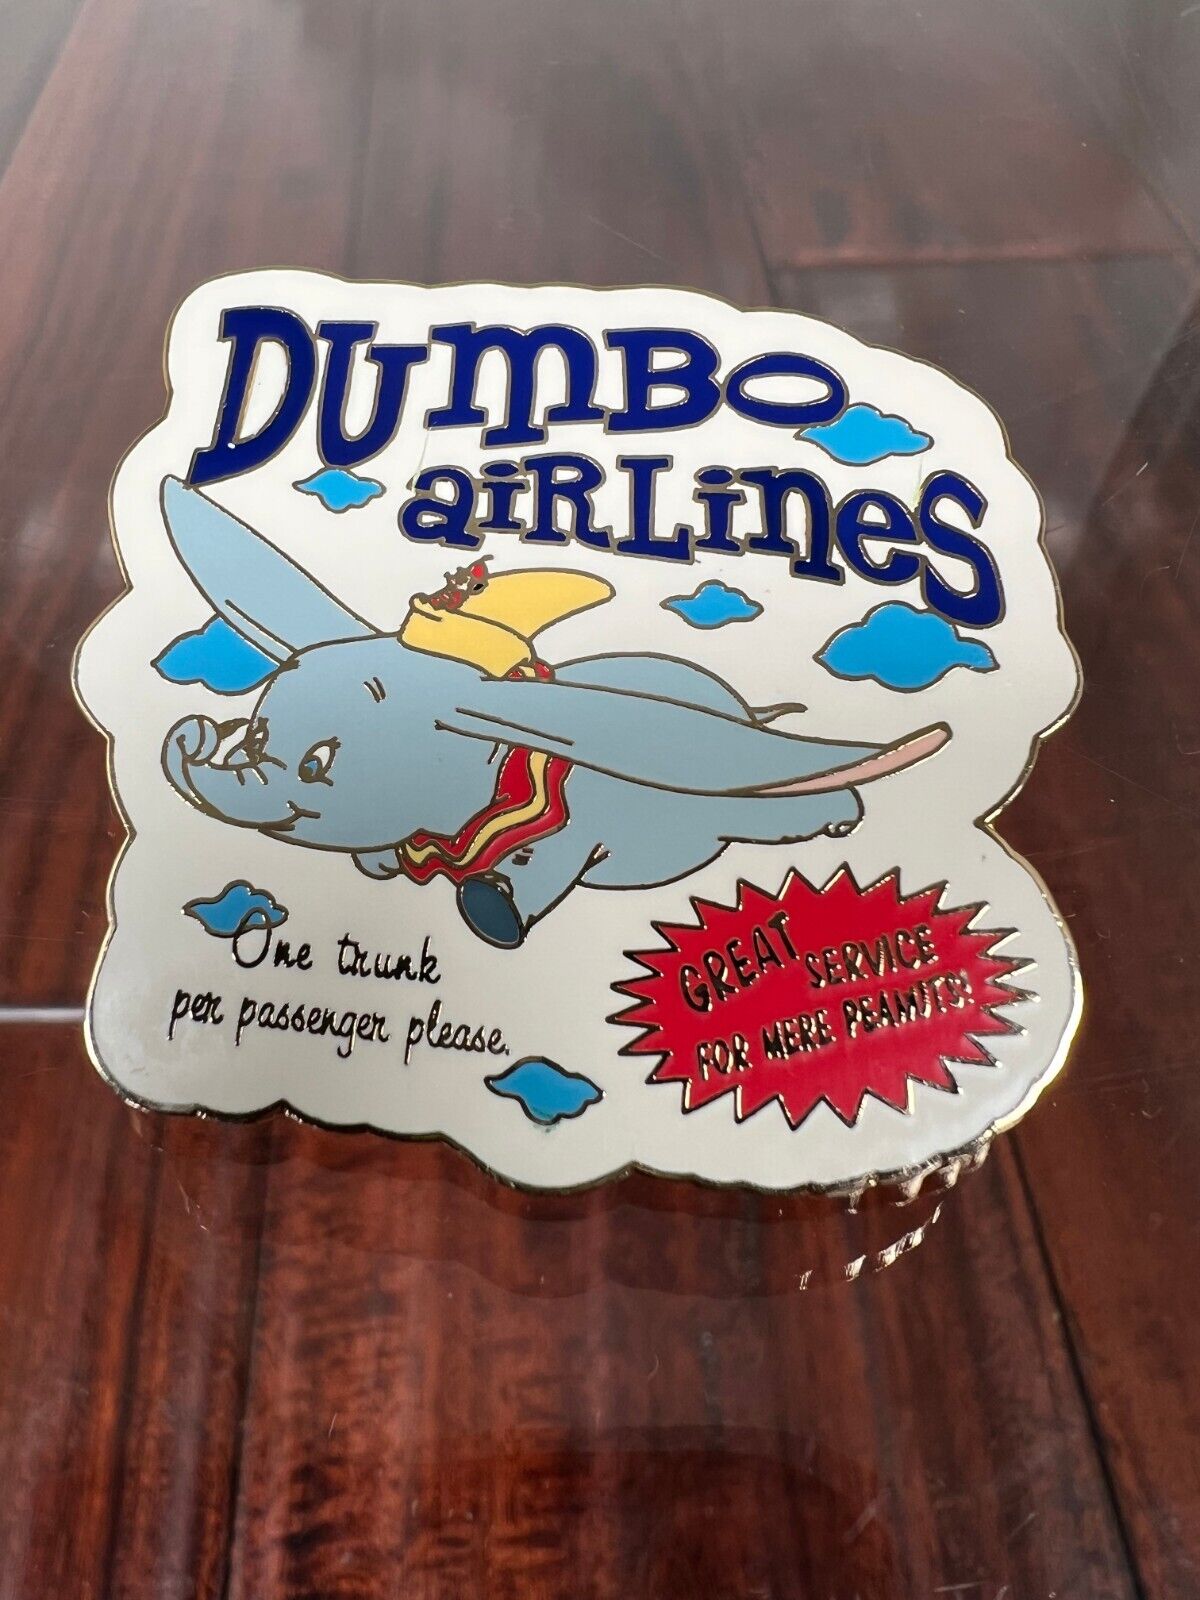 Disney Trading Pins 27718 DLR - Dumbo Airlines